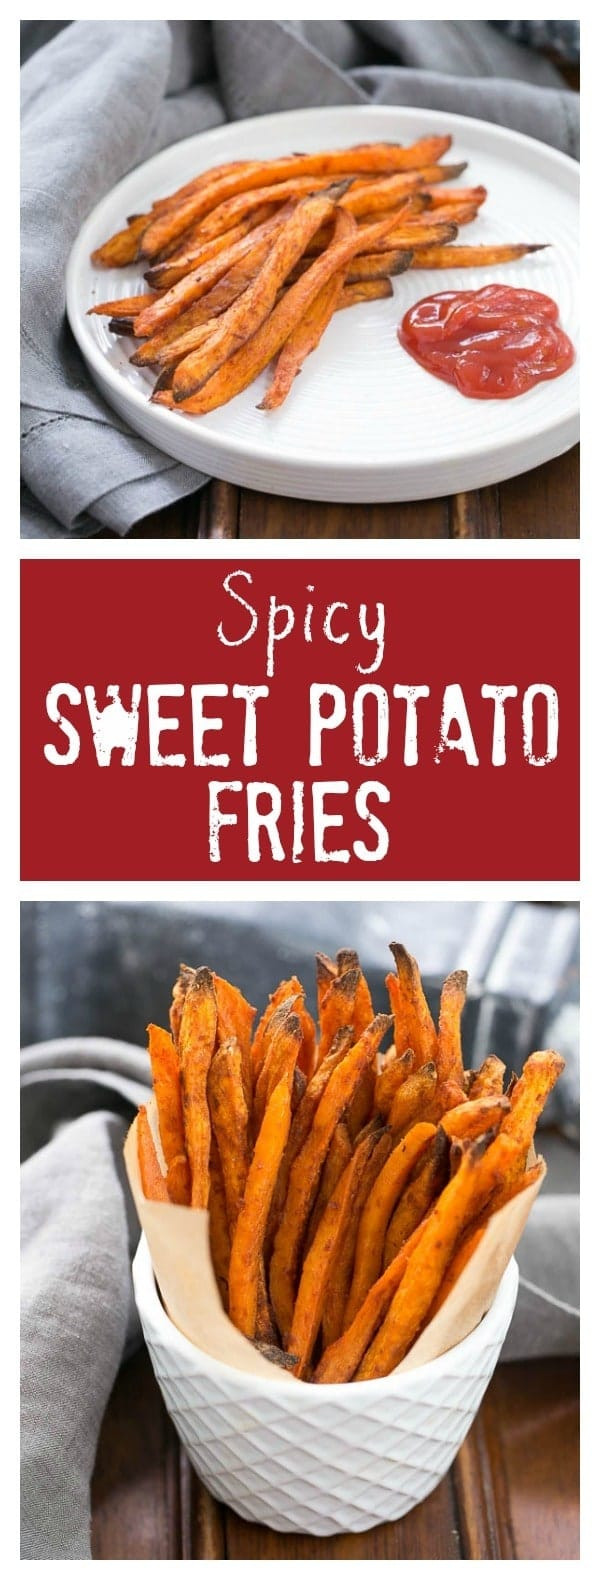 Spicy Sweet Potato Fries
 Spicy Sweet Potato Fries That Skinny Chick Can Bake